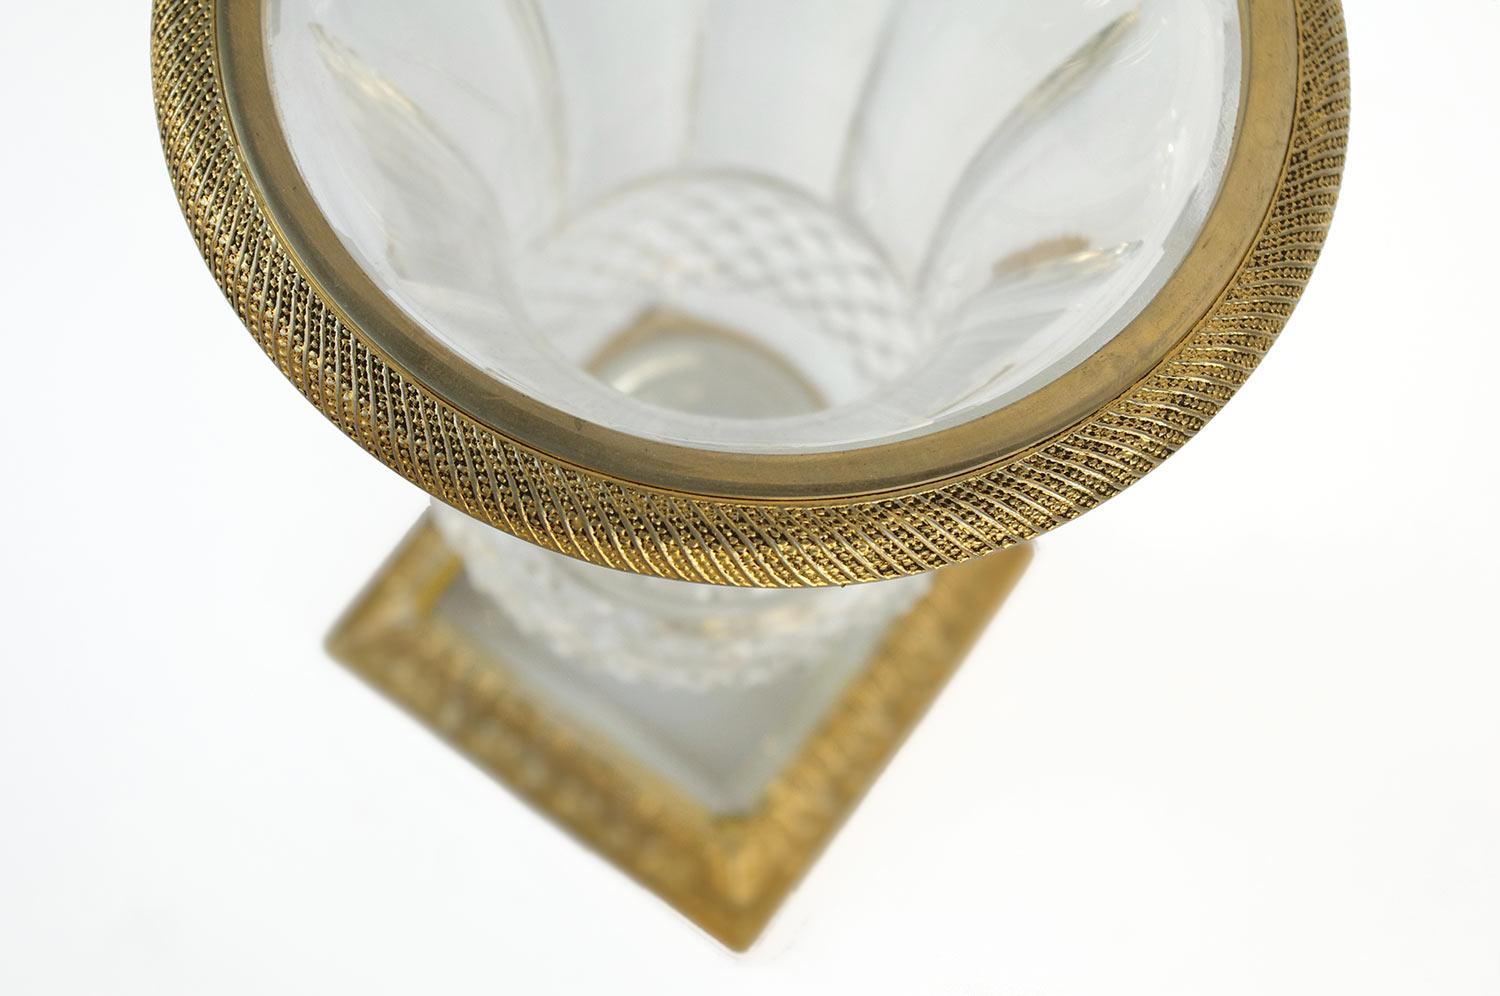 Medici vase in diamond cut crystal on the bugle and with facets on the neck. Edge in gilt bronze decorated with cables. Square base in cut crystal and gilt bronze decorated with acanthus leaves.

Work realized in the 1950s.